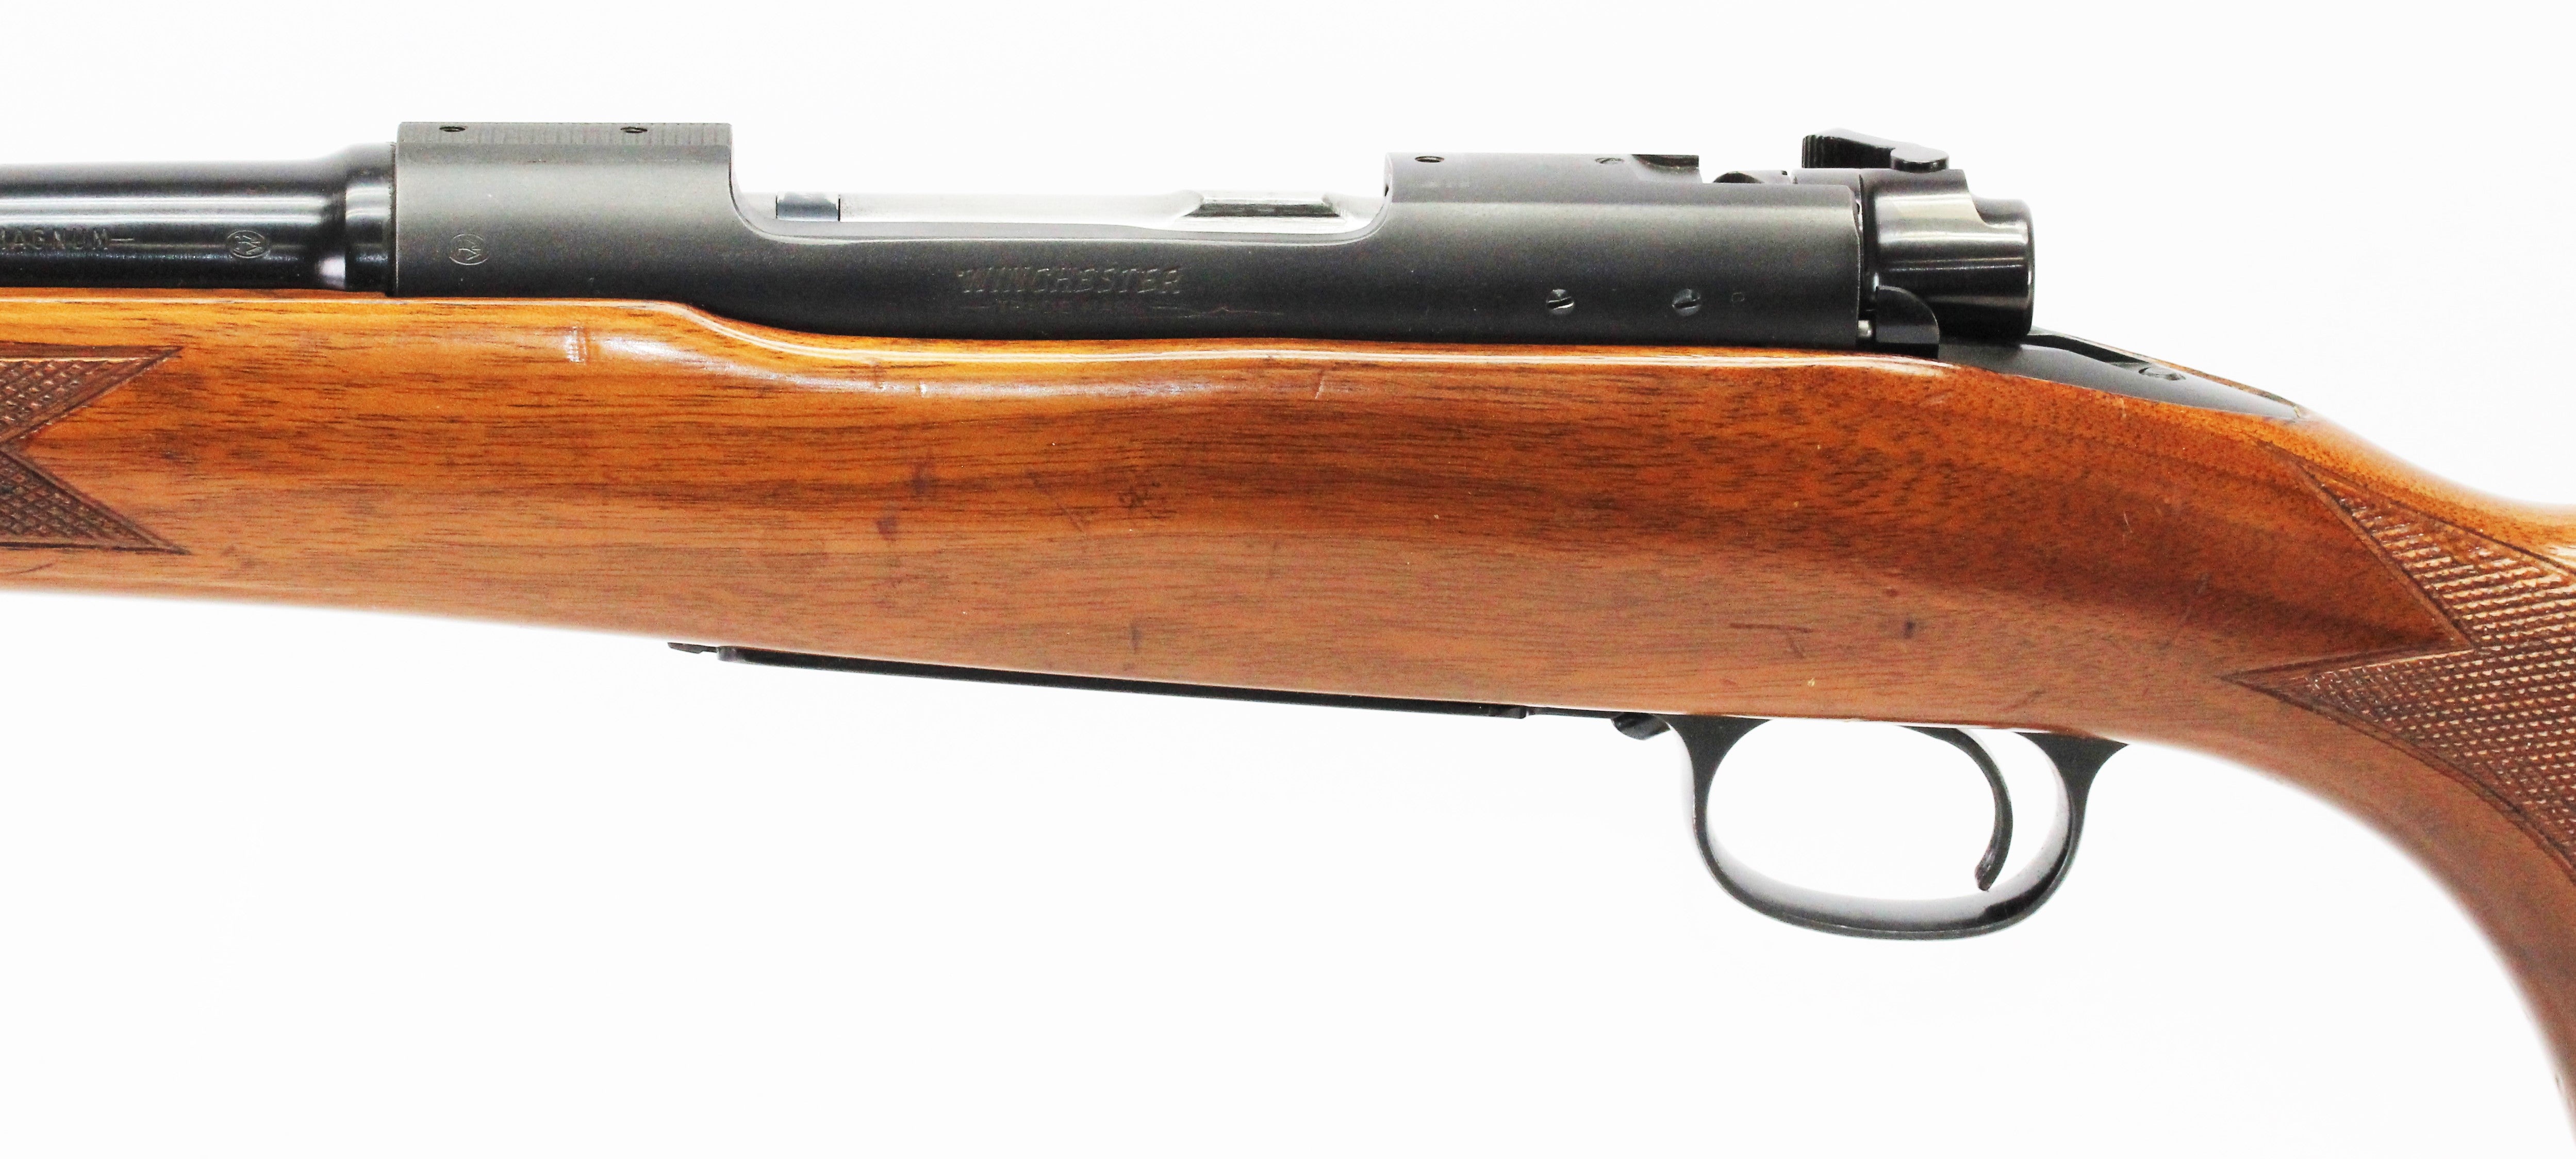 .264 Win Mag Featherweight Rifle - 1962